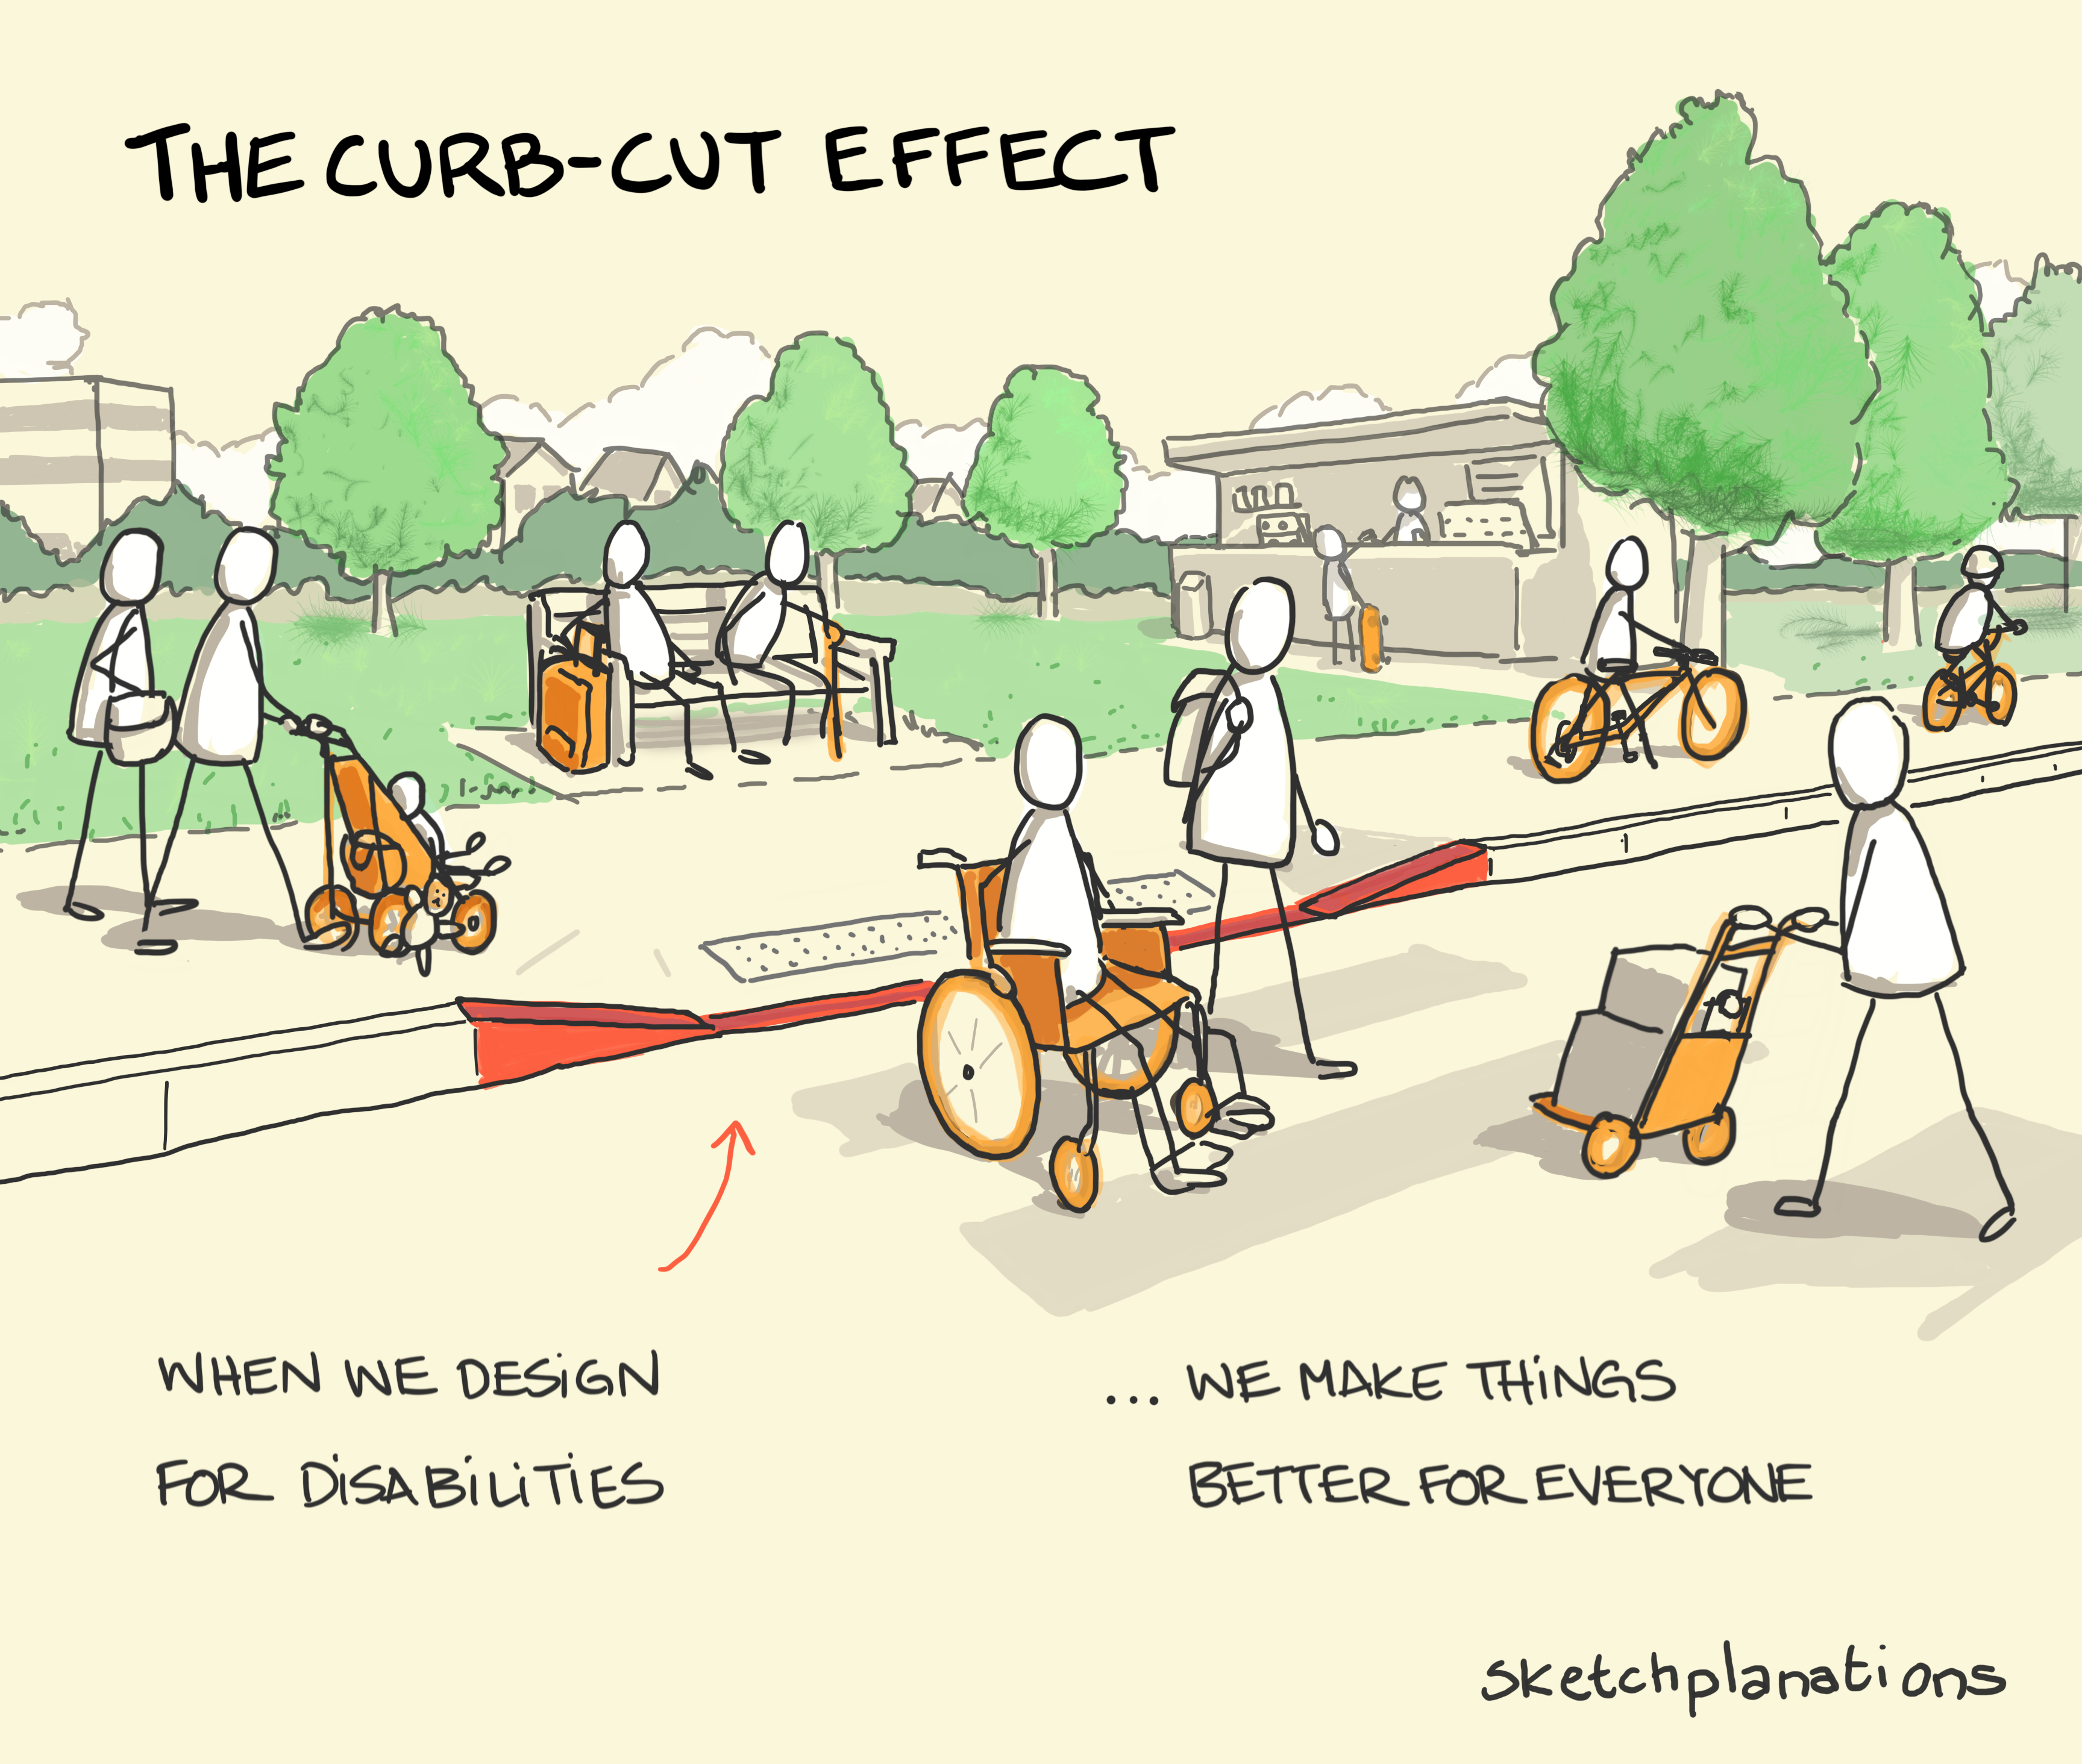 Cartoon showing strollers, suitcases, bicycles, carts, and wheelchairs using curb cuts